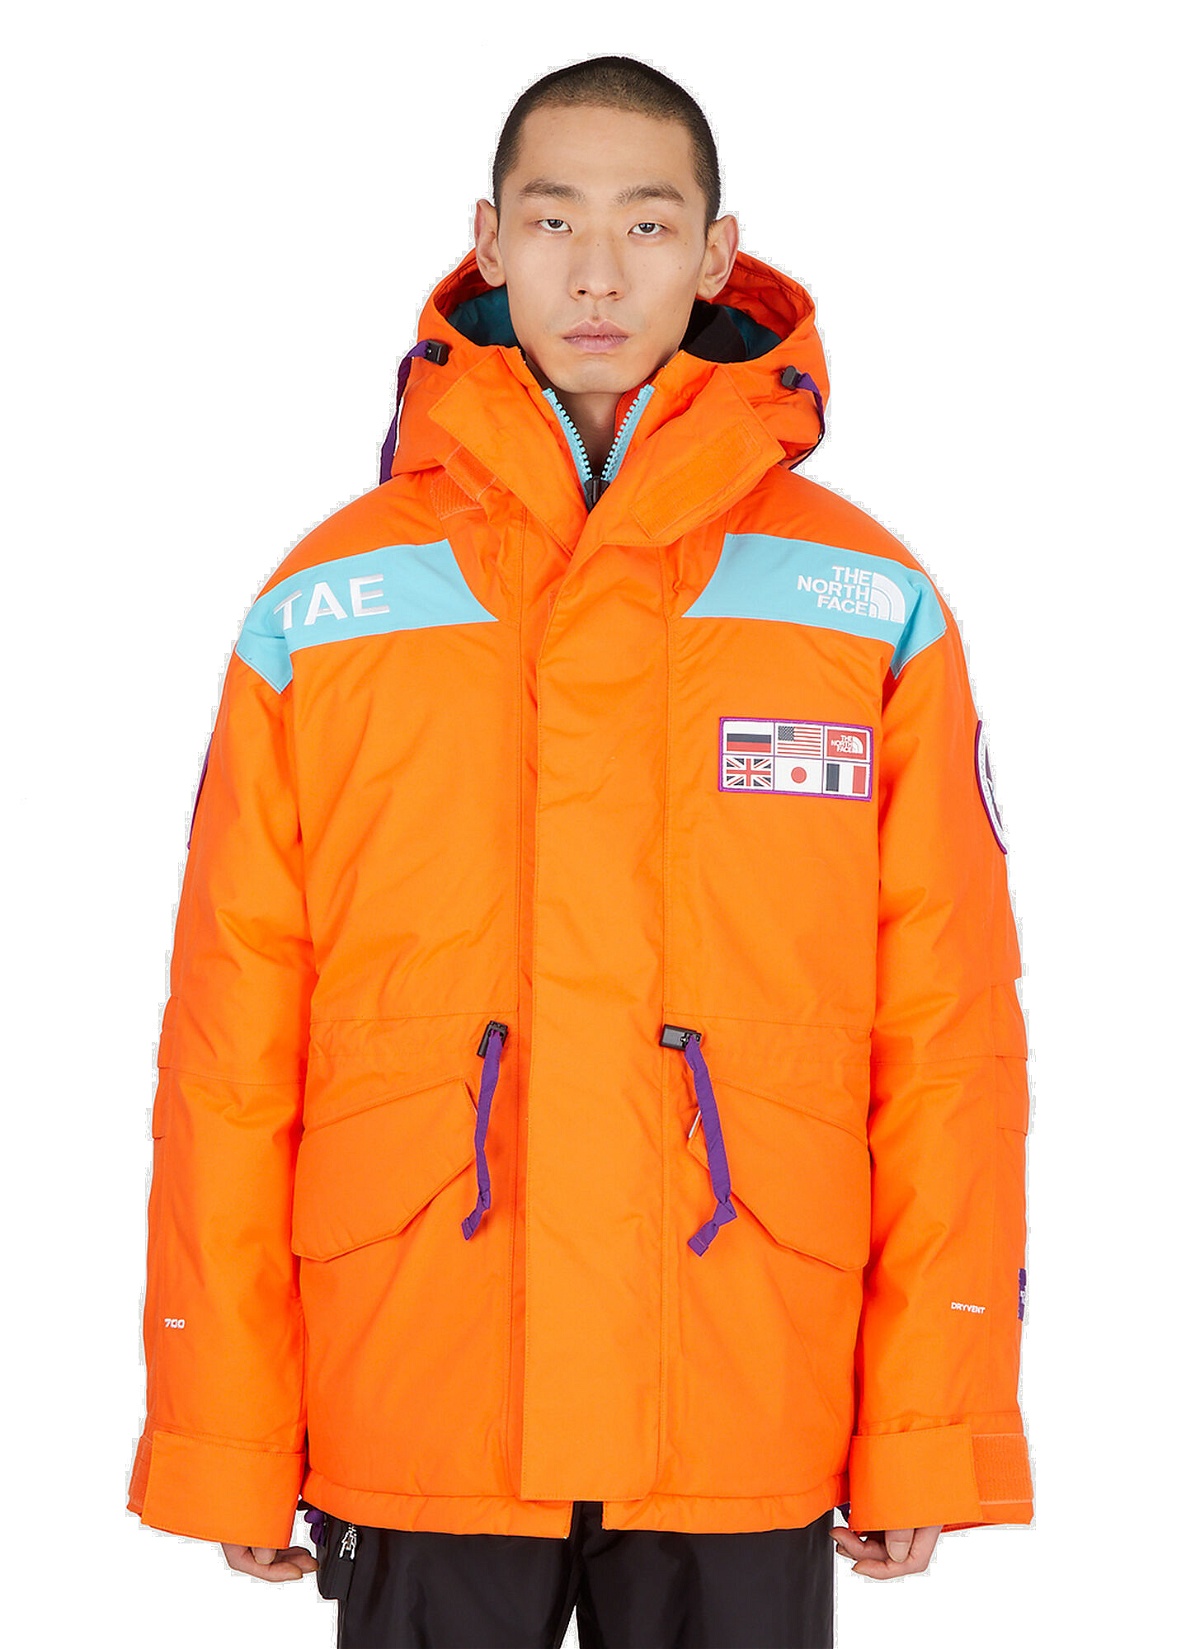 Trans Antarctica Expedition The Face Orange Jacket North in